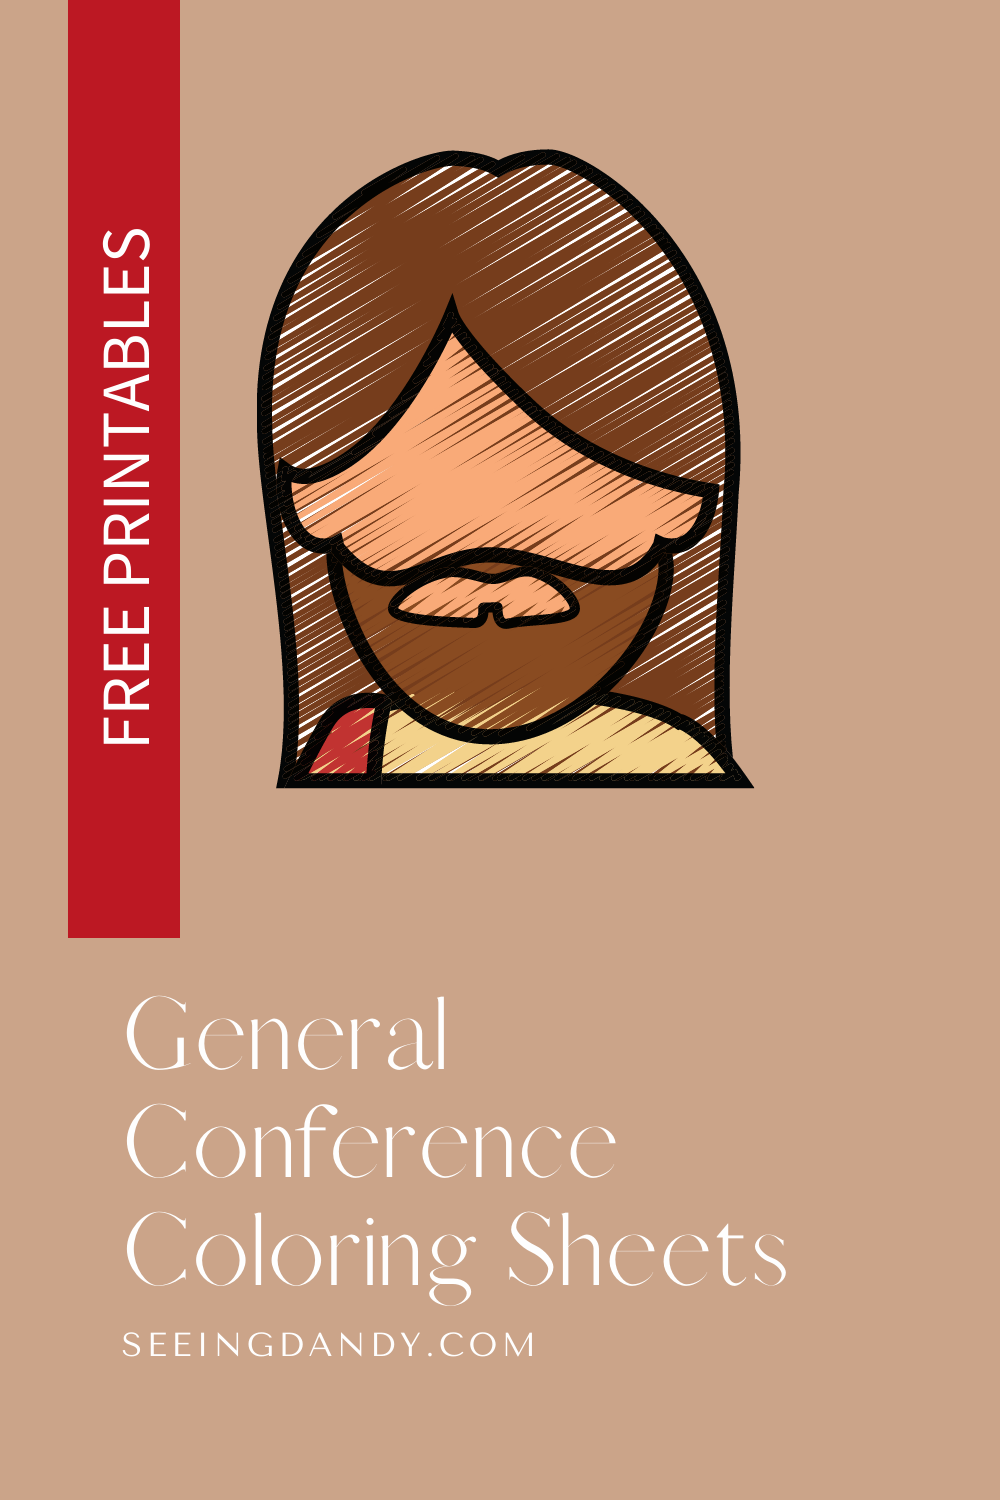 General conference coloring sheets with previous favorite quotes